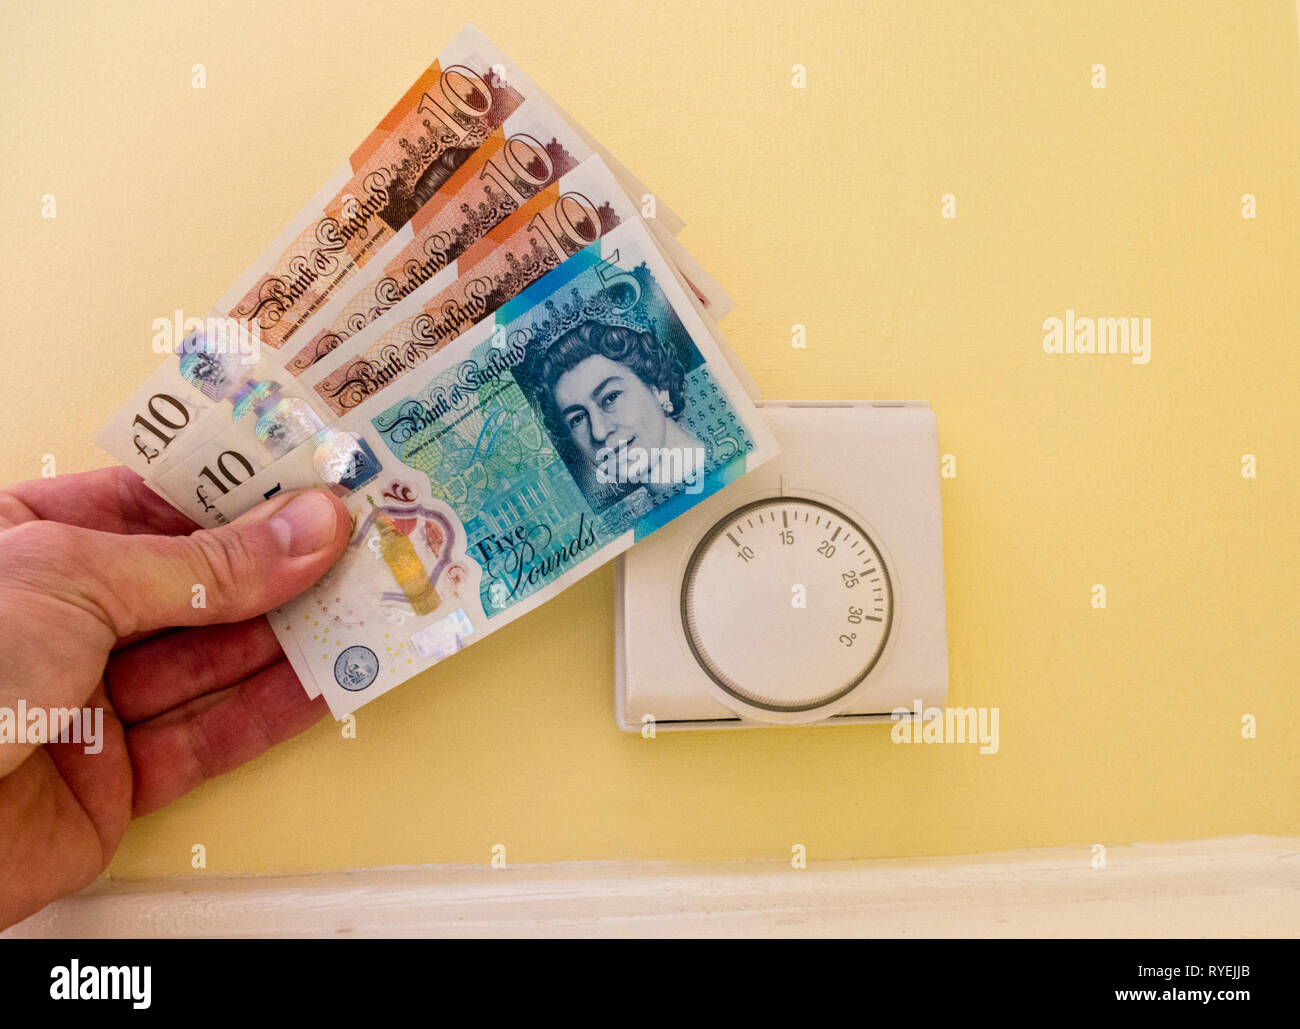 Honeywell Central Heating Room Thermostat With Man's Hand Holding Pound Sterling Notes Money Regarding Heating Costs, UK Stock Photo